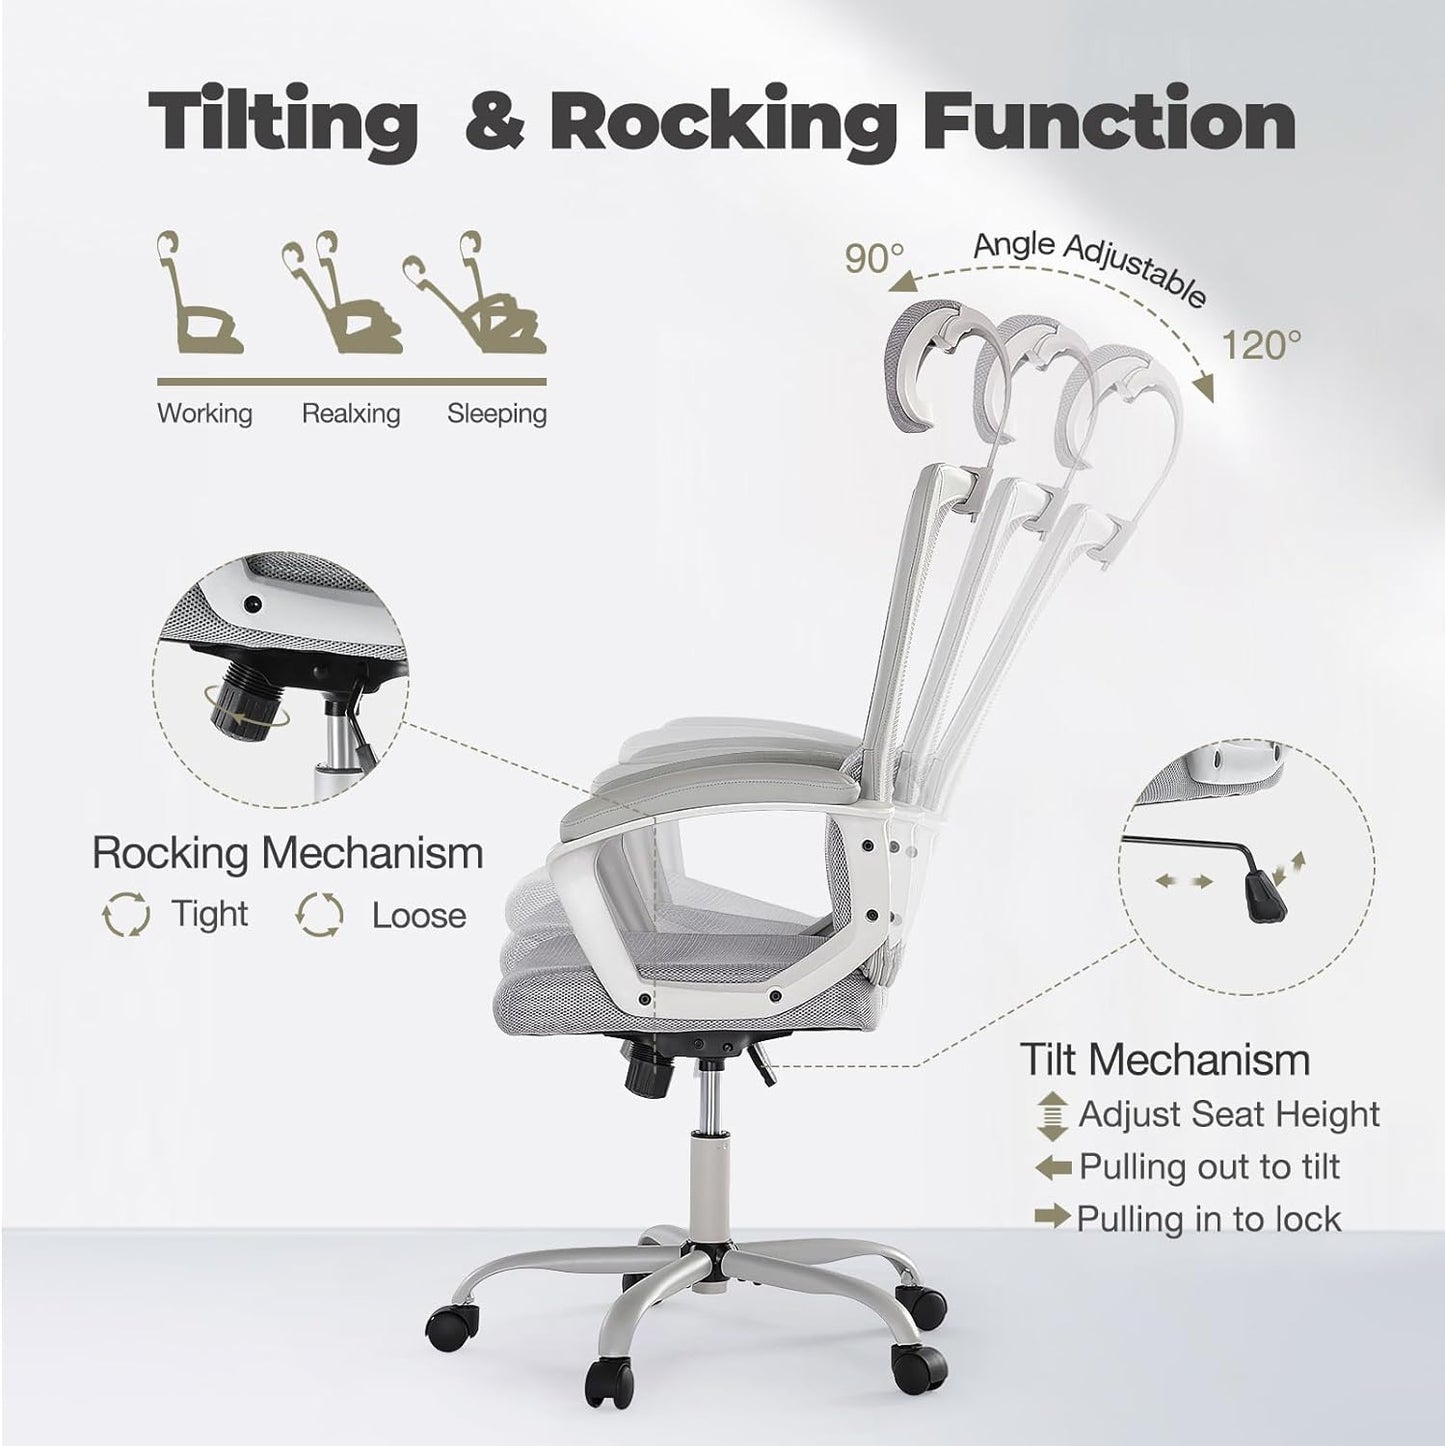 Ergonomic Home Mesh Swivel Rolling Office Desk Computer Chair with Adjustable Ergonomic Home Mesh Swivel Rolling Office Desk Computer Chair with Adjustable Headrest, Soft PU Armrest, Lumbar Support and Rocking Function, 18.11" D x 19.49" W x 43.5" H, Grey